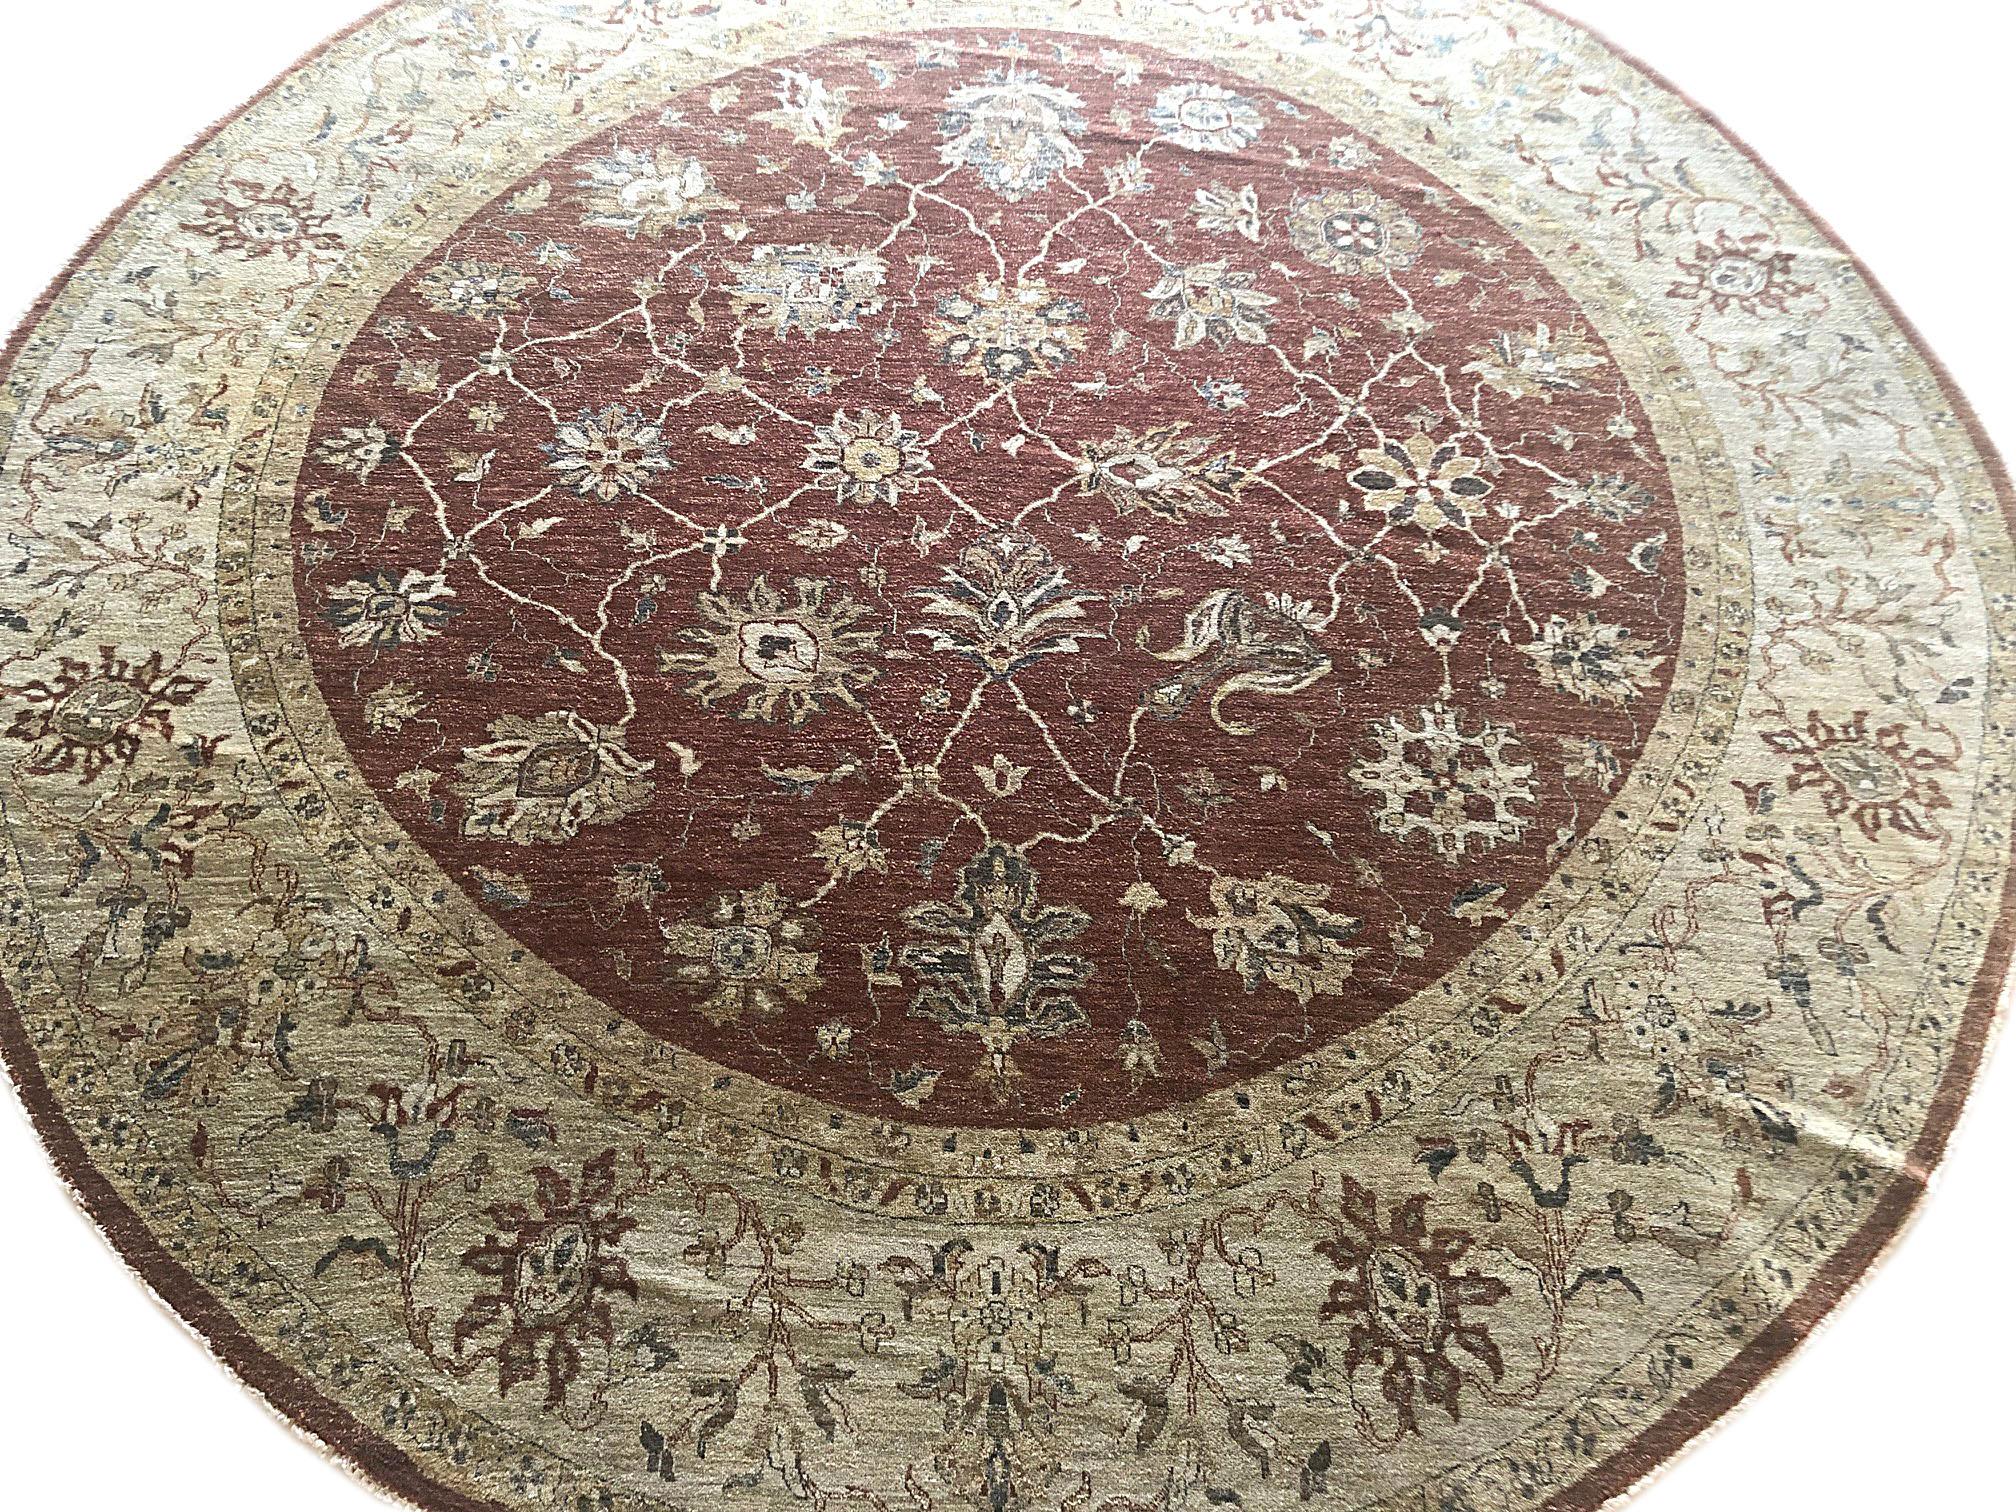 This beautiful round rug is from India and has Peshawar woven style. The size is 11 feet and 8 inches. The design is Mahal. The pile is wool and the foundation is cotton. This rug has a very small re-weaving on one side. This is a pre-owned rug.